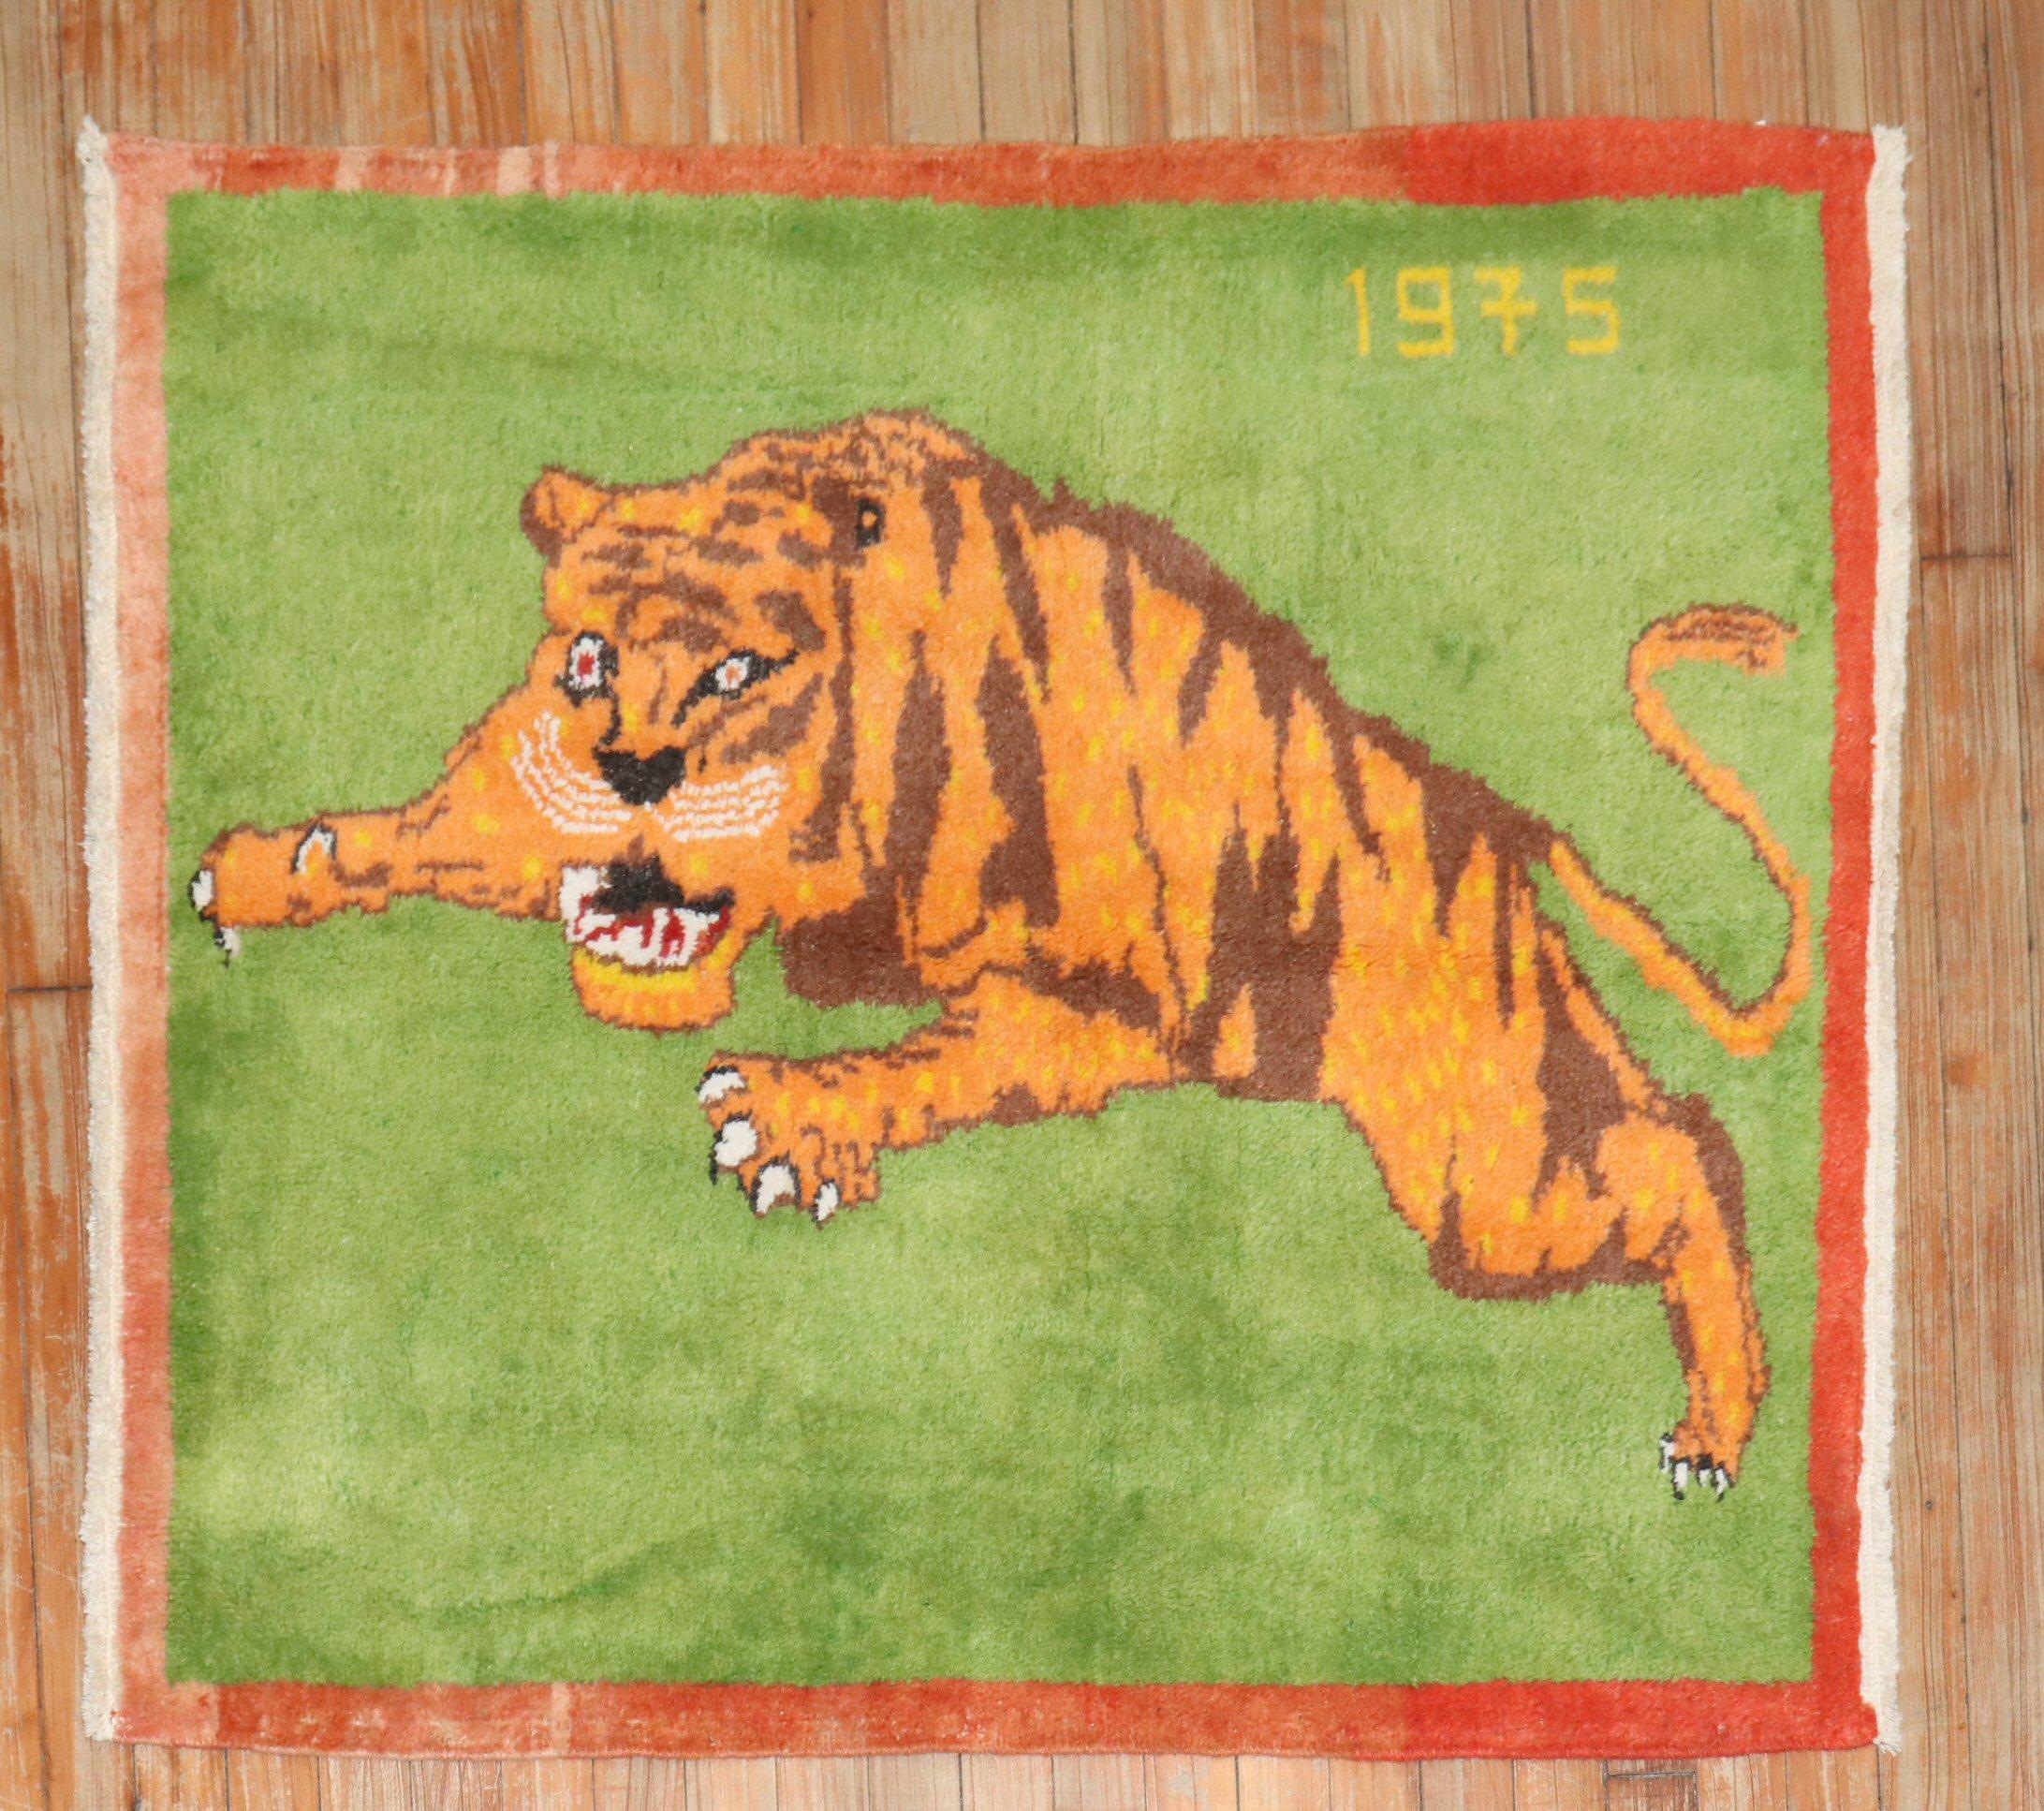 One-of-a-kind Turkish pictorial depicting a tiger on a green ground. RAAARRRR!!! dated 1975

Measures: 3'3'' x 3'8''.